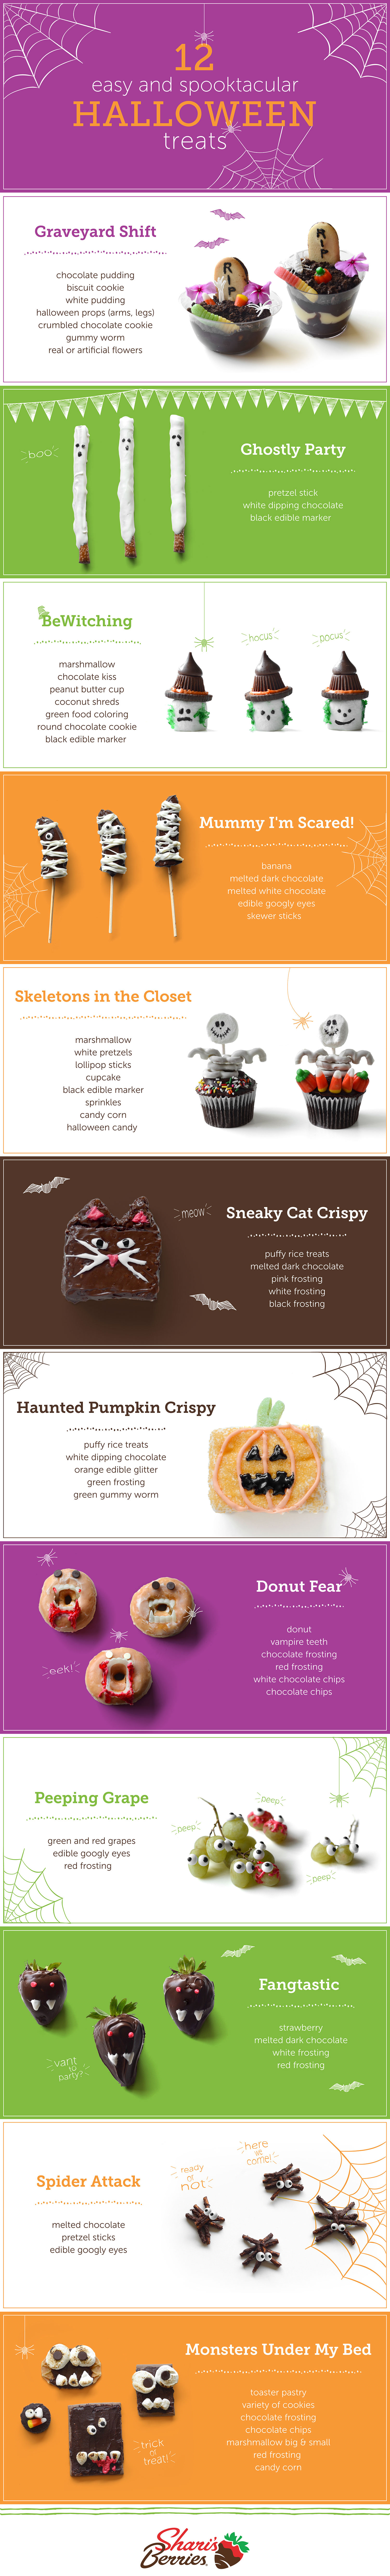 Halloween desserts shown on an infographic.